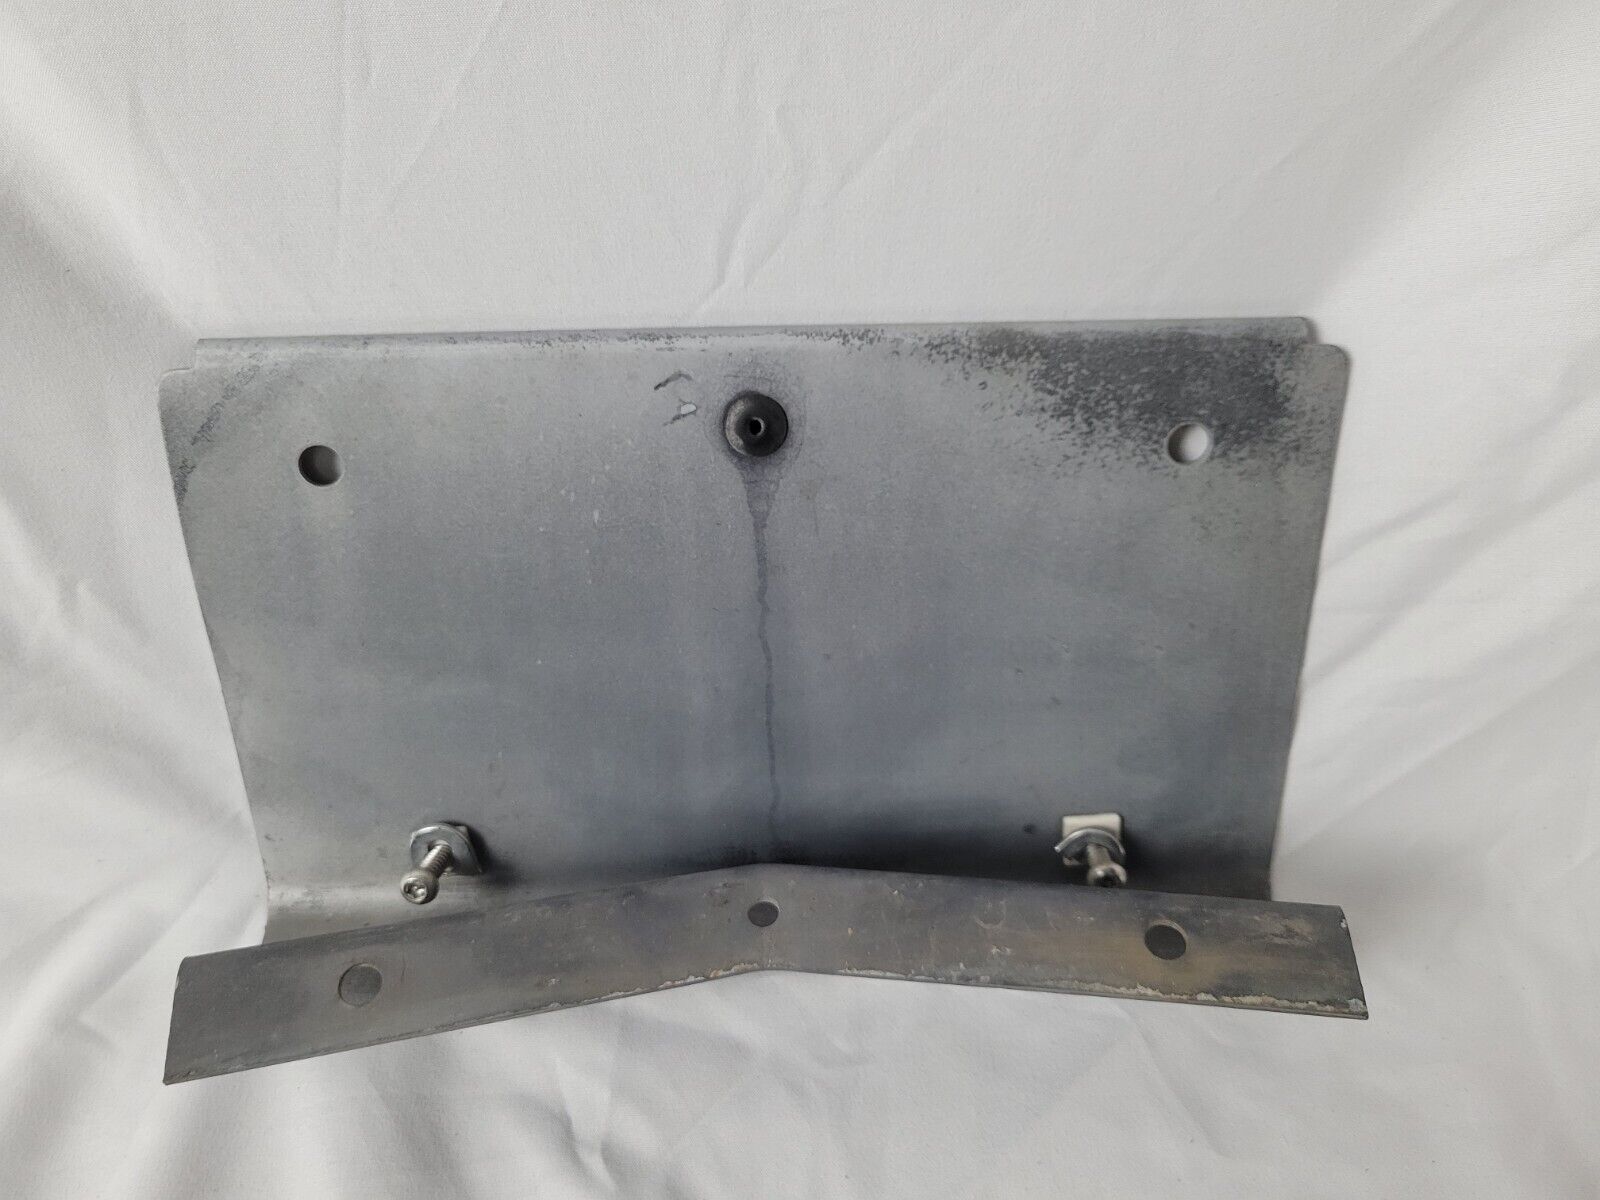 1993 - 1996 Cadillac Fleetwood Brougham Front Bumper License Plate Holder Mount 